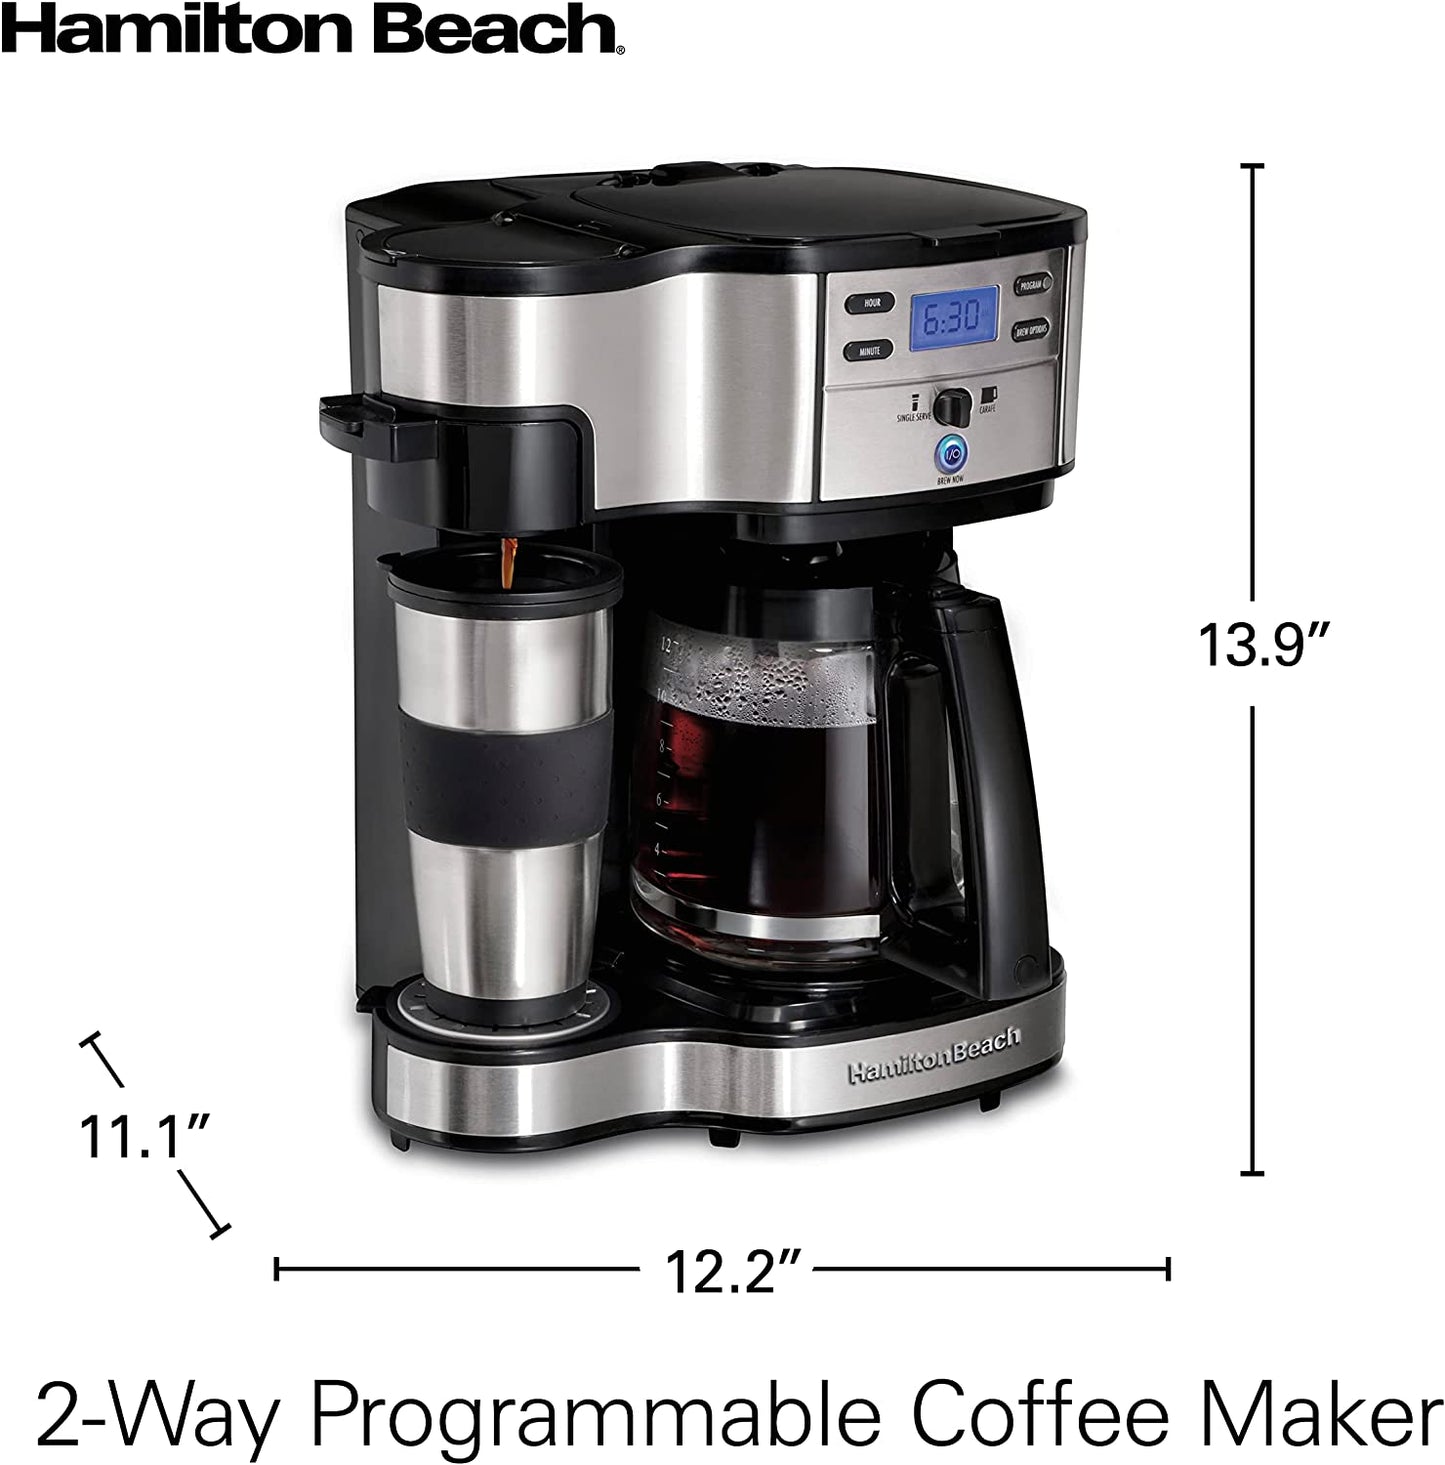 2-Way 12 Cup Programmable Drip Coffee Maker & Single Serve Machine, Glass Carafe, Auto Pause and Pour, Black (49980R)